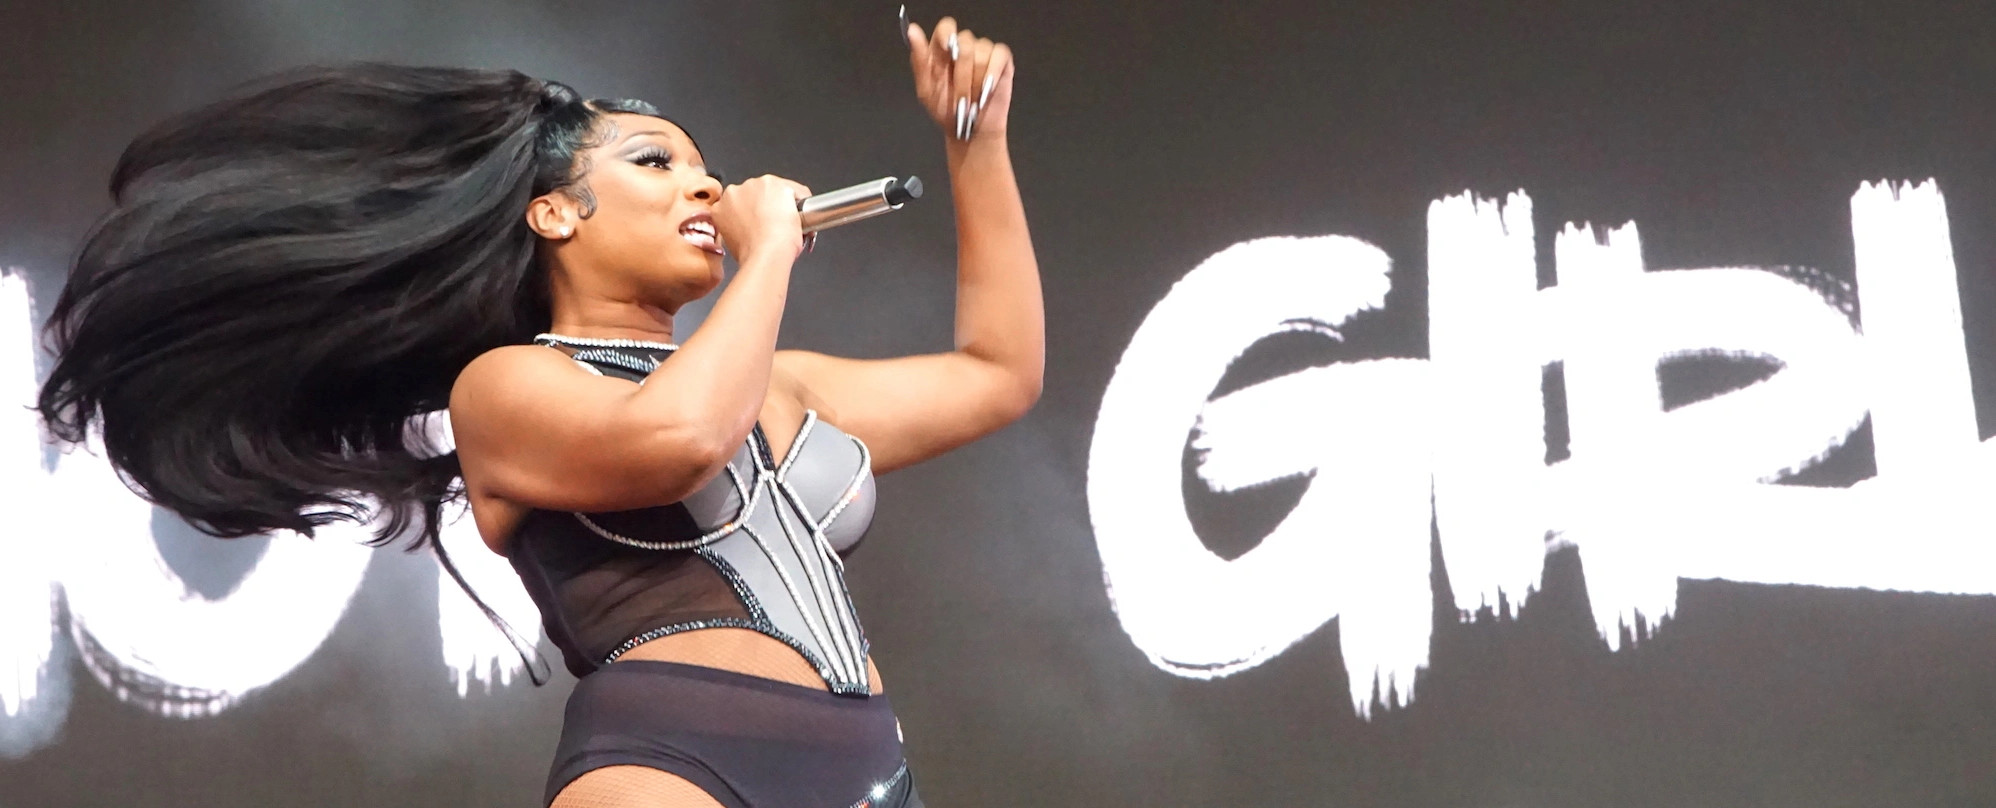 Megan Thee Stallion’s Label Counter-Sues the Star for Money, Music